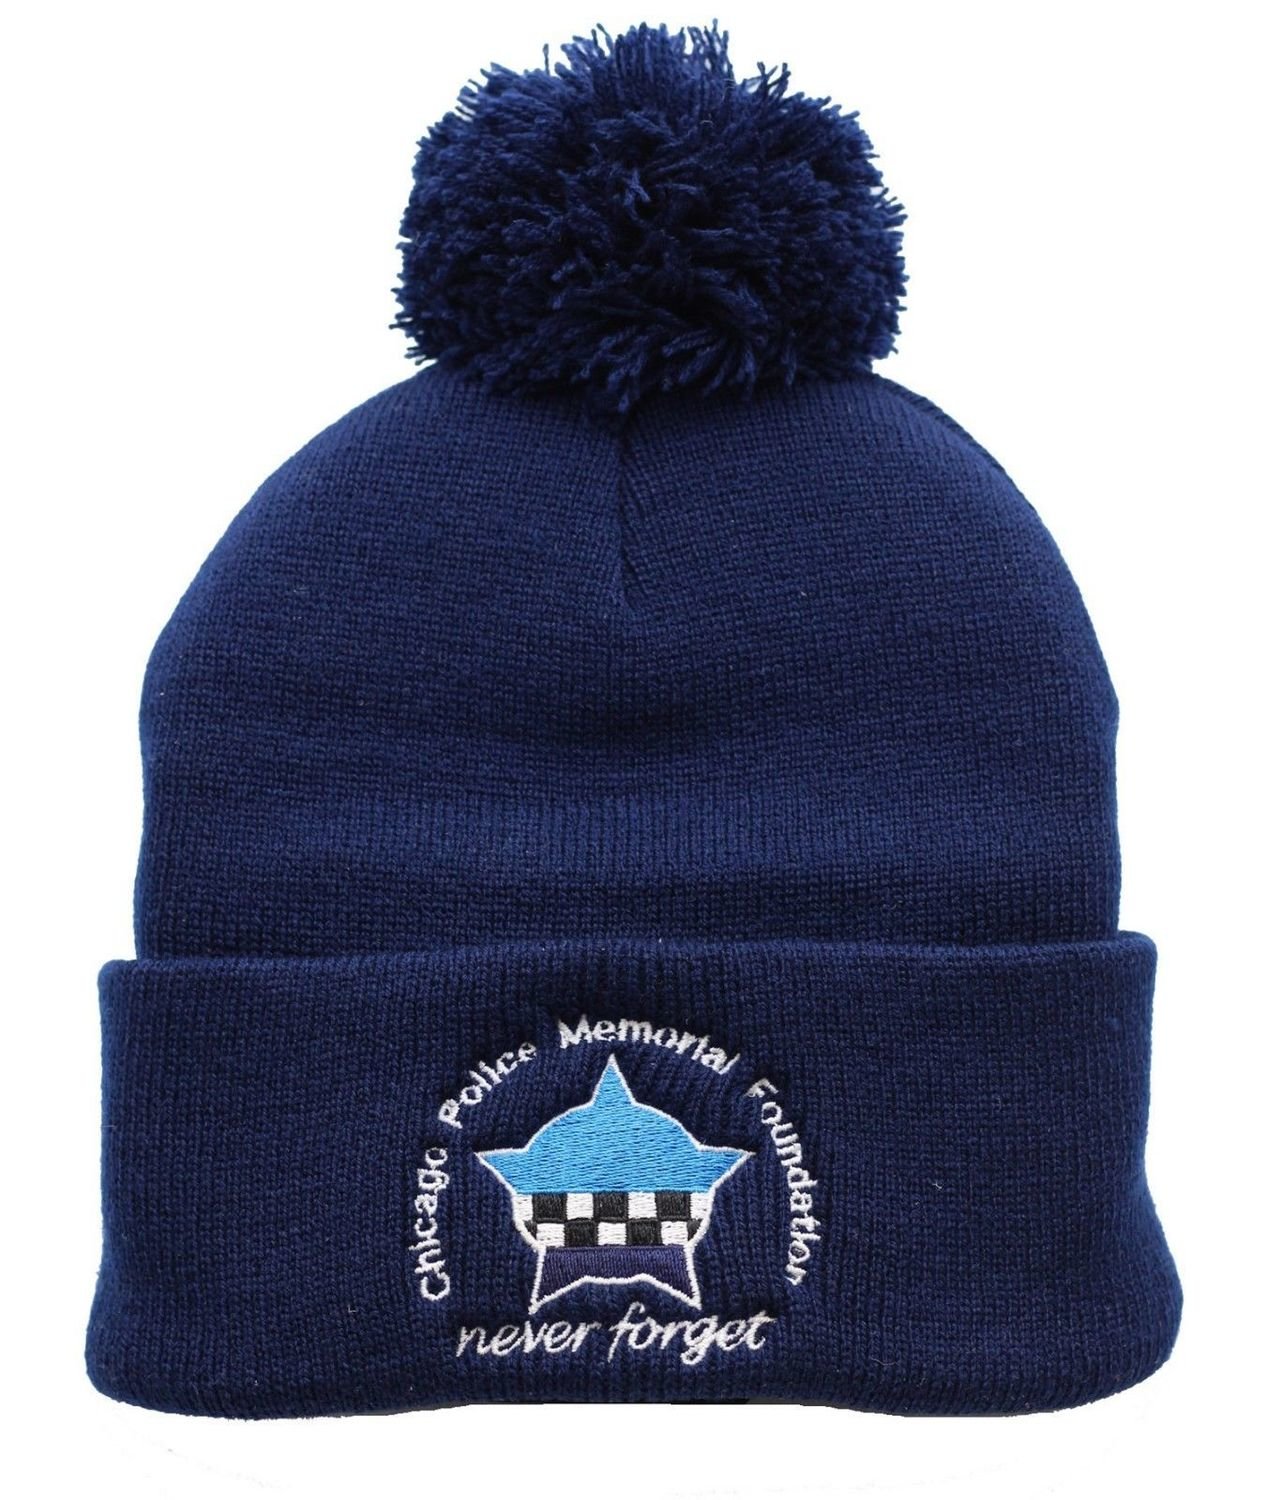 CPD Memorial Navy Knit Cap with Pom and Cuff